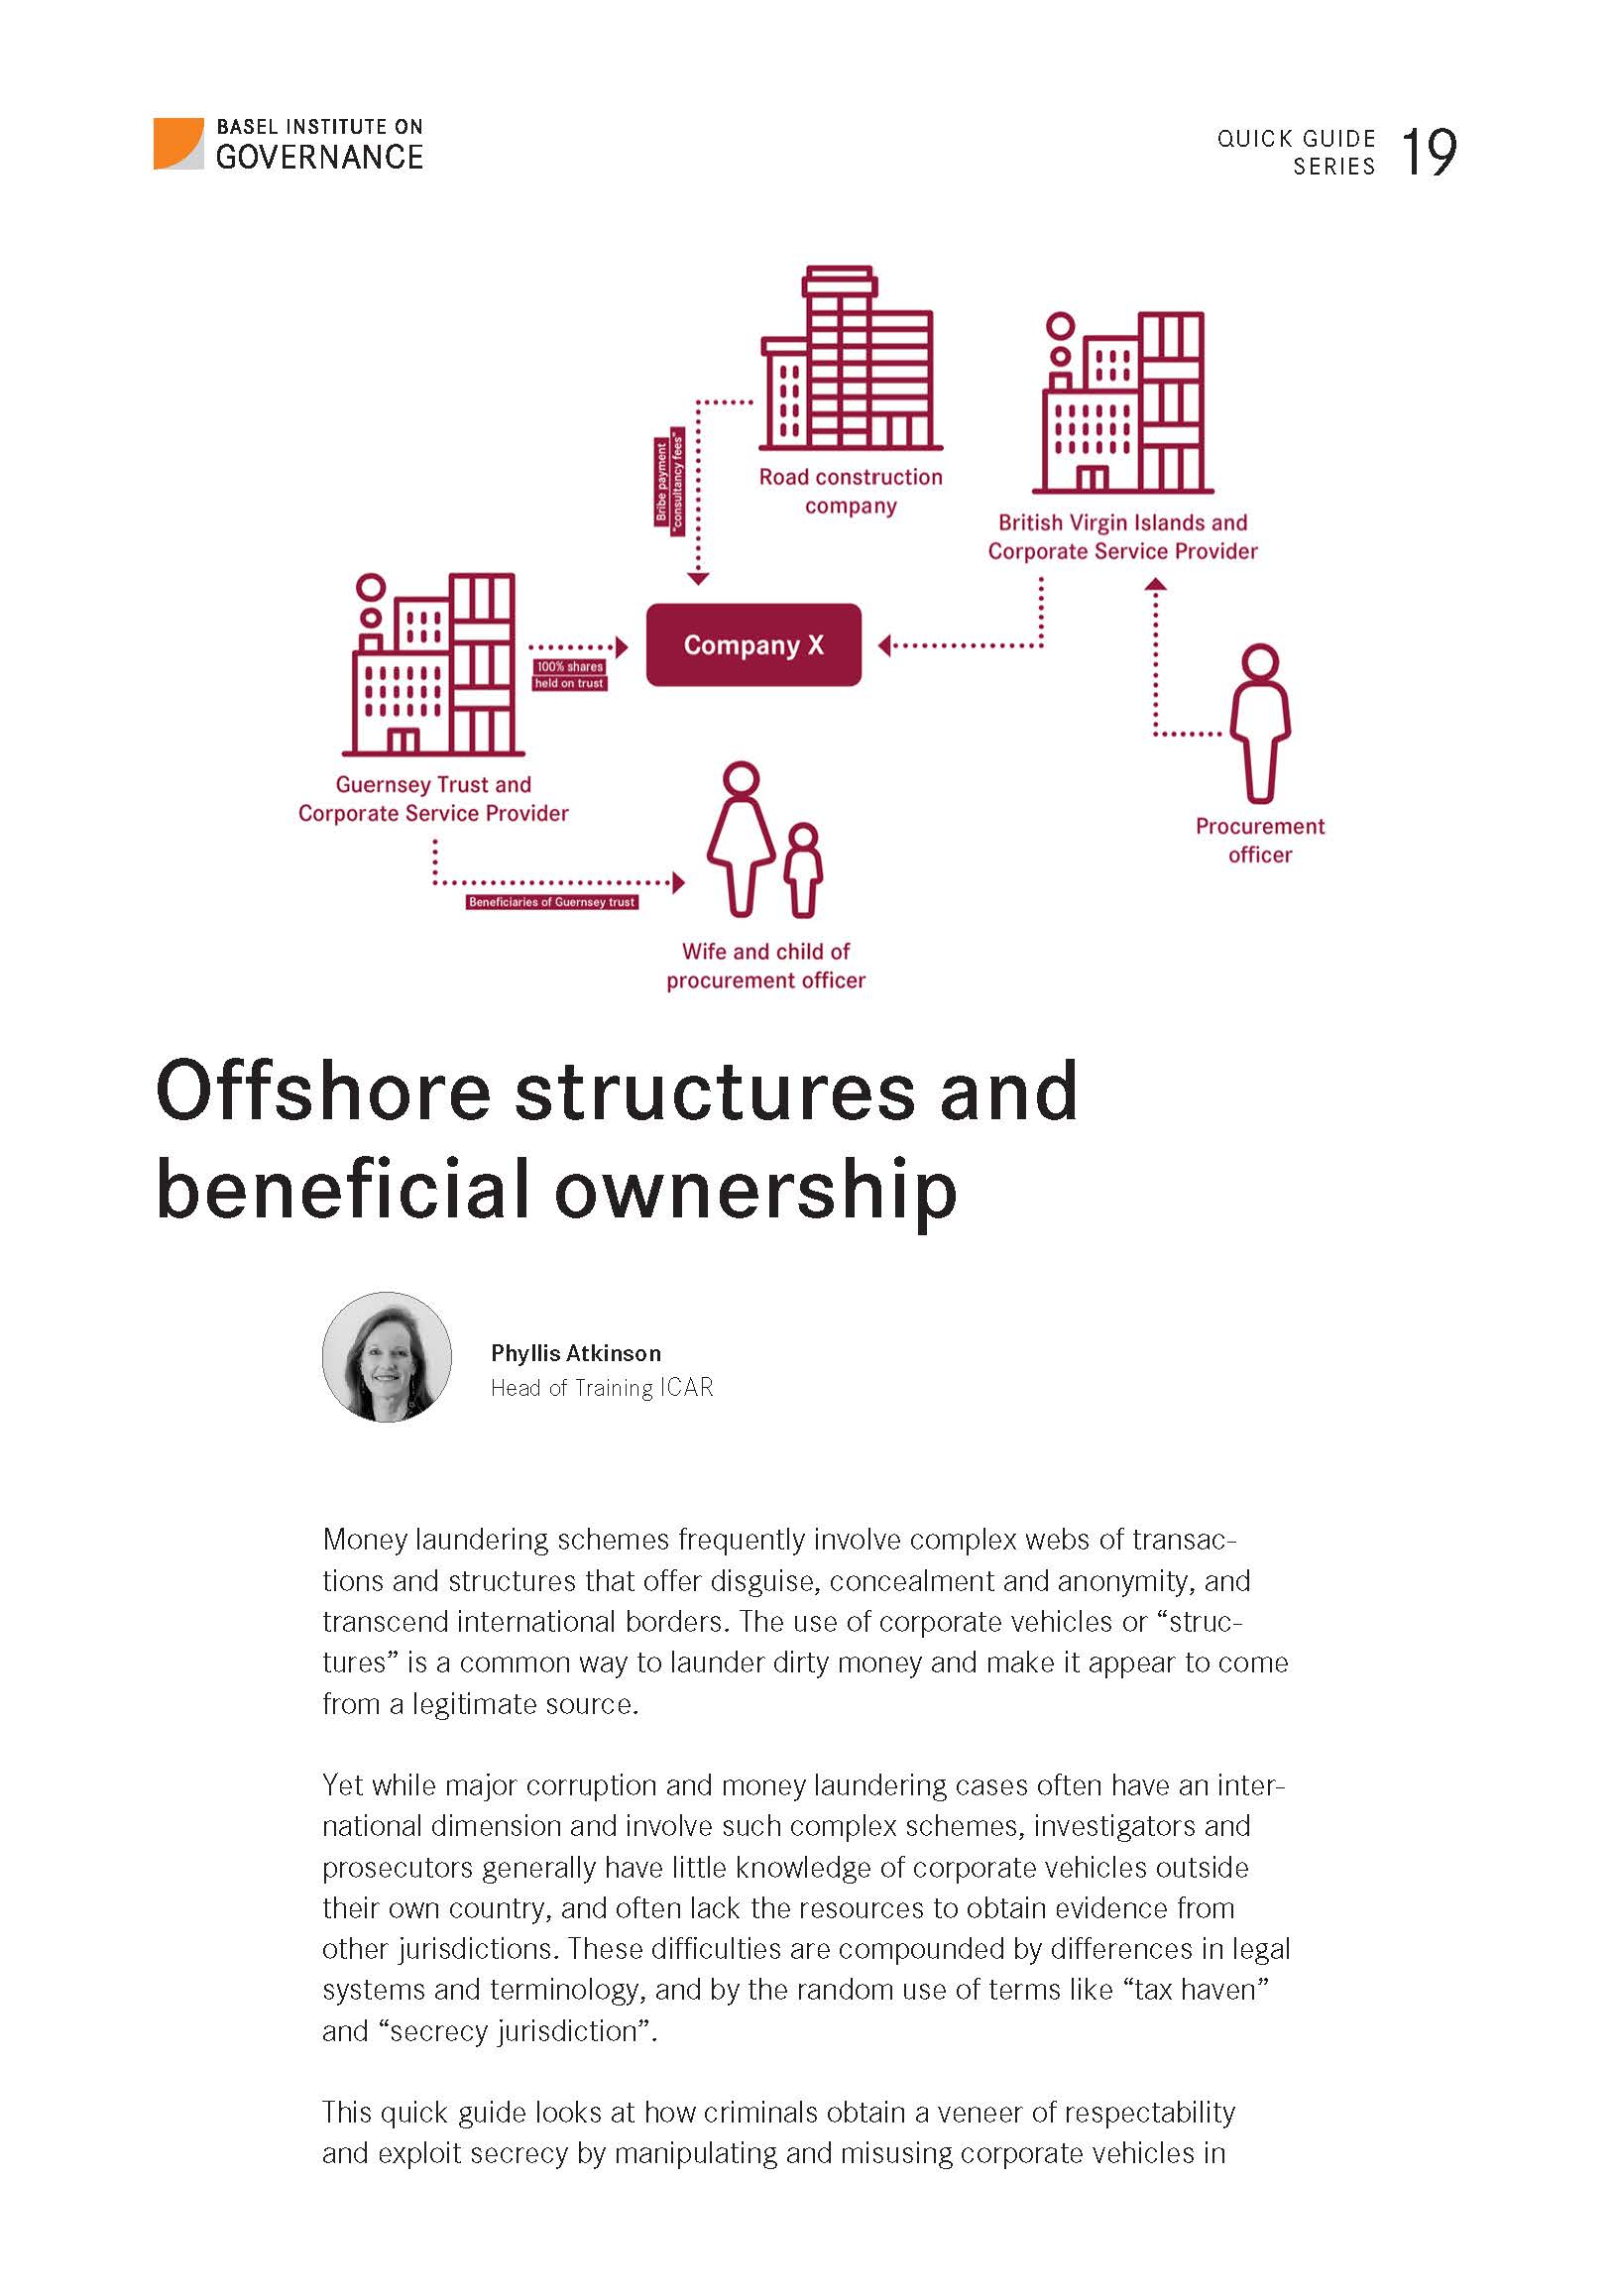 Offshore structures and beneficial ownership quick guide